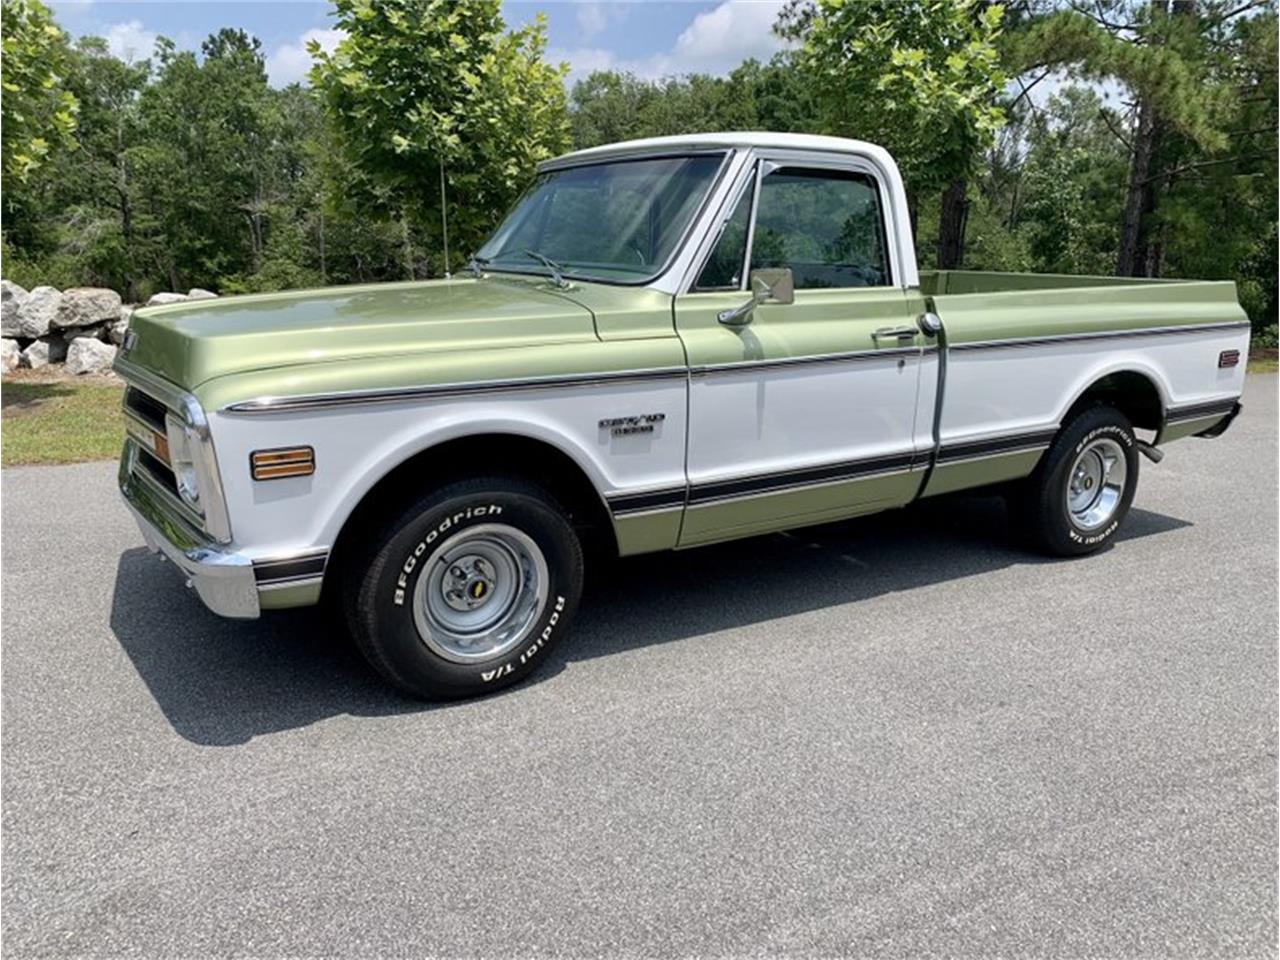 For Sale at Auction: 1969 Chevrolet C10 in Greensboro, North Carolina for sale in Greensboro, NC